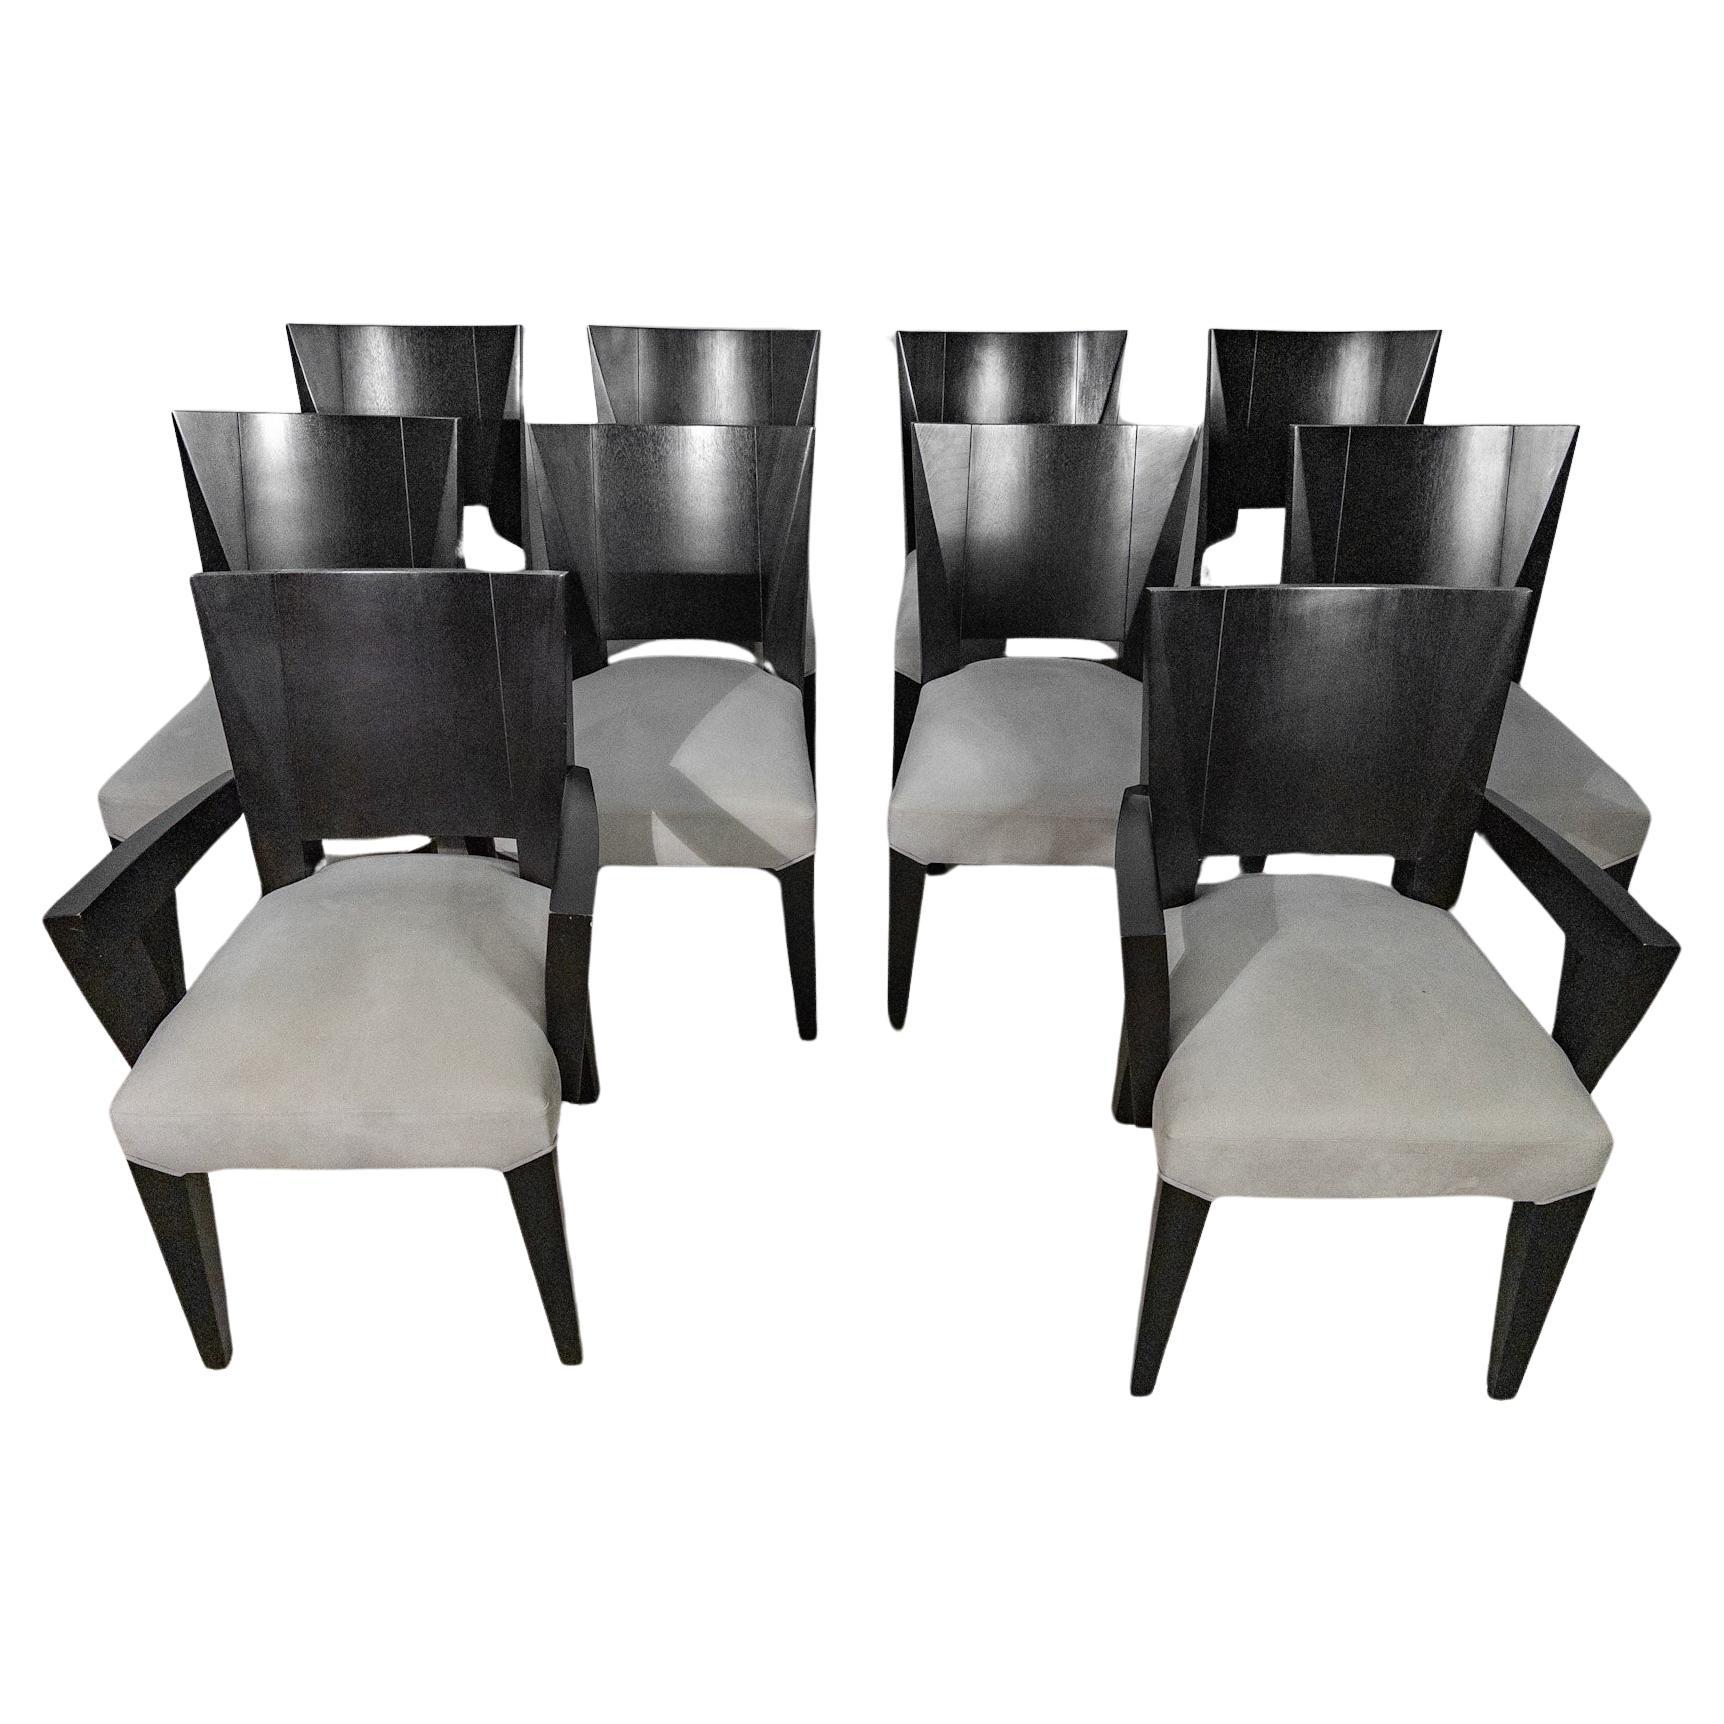 Set of 10 Ocean Dining Chairs by Dakota Jackson (2 Arm Chairs, 8 Side Chairs)